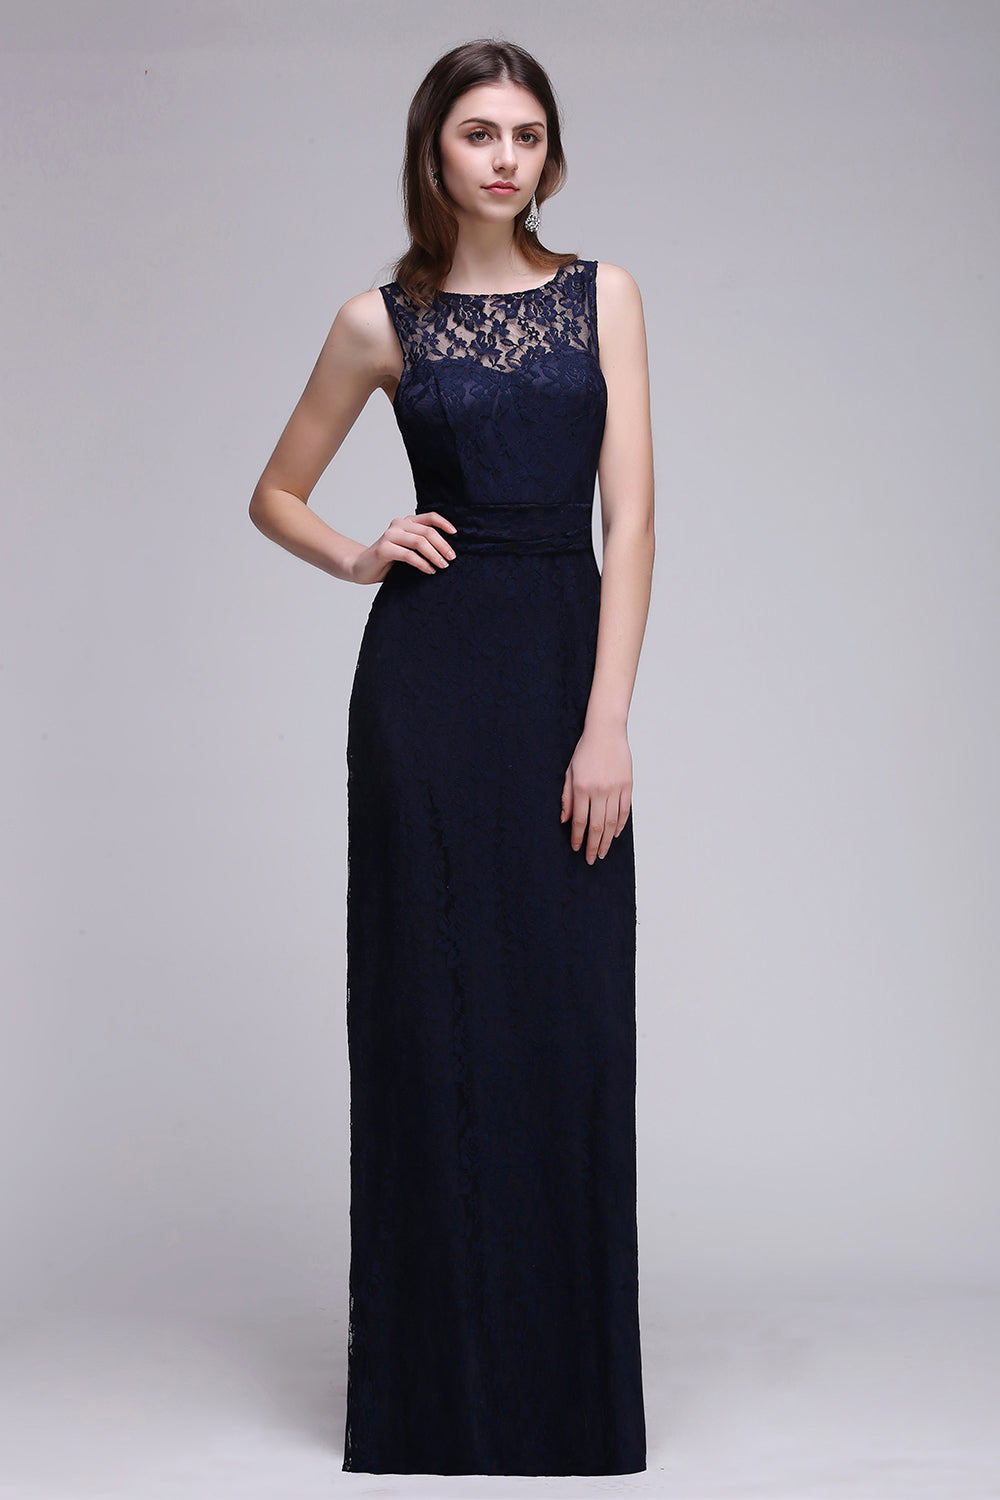 Chic Sleeveless Scoop Lace Bridesmaid Dress with Keyhole Back-27dress